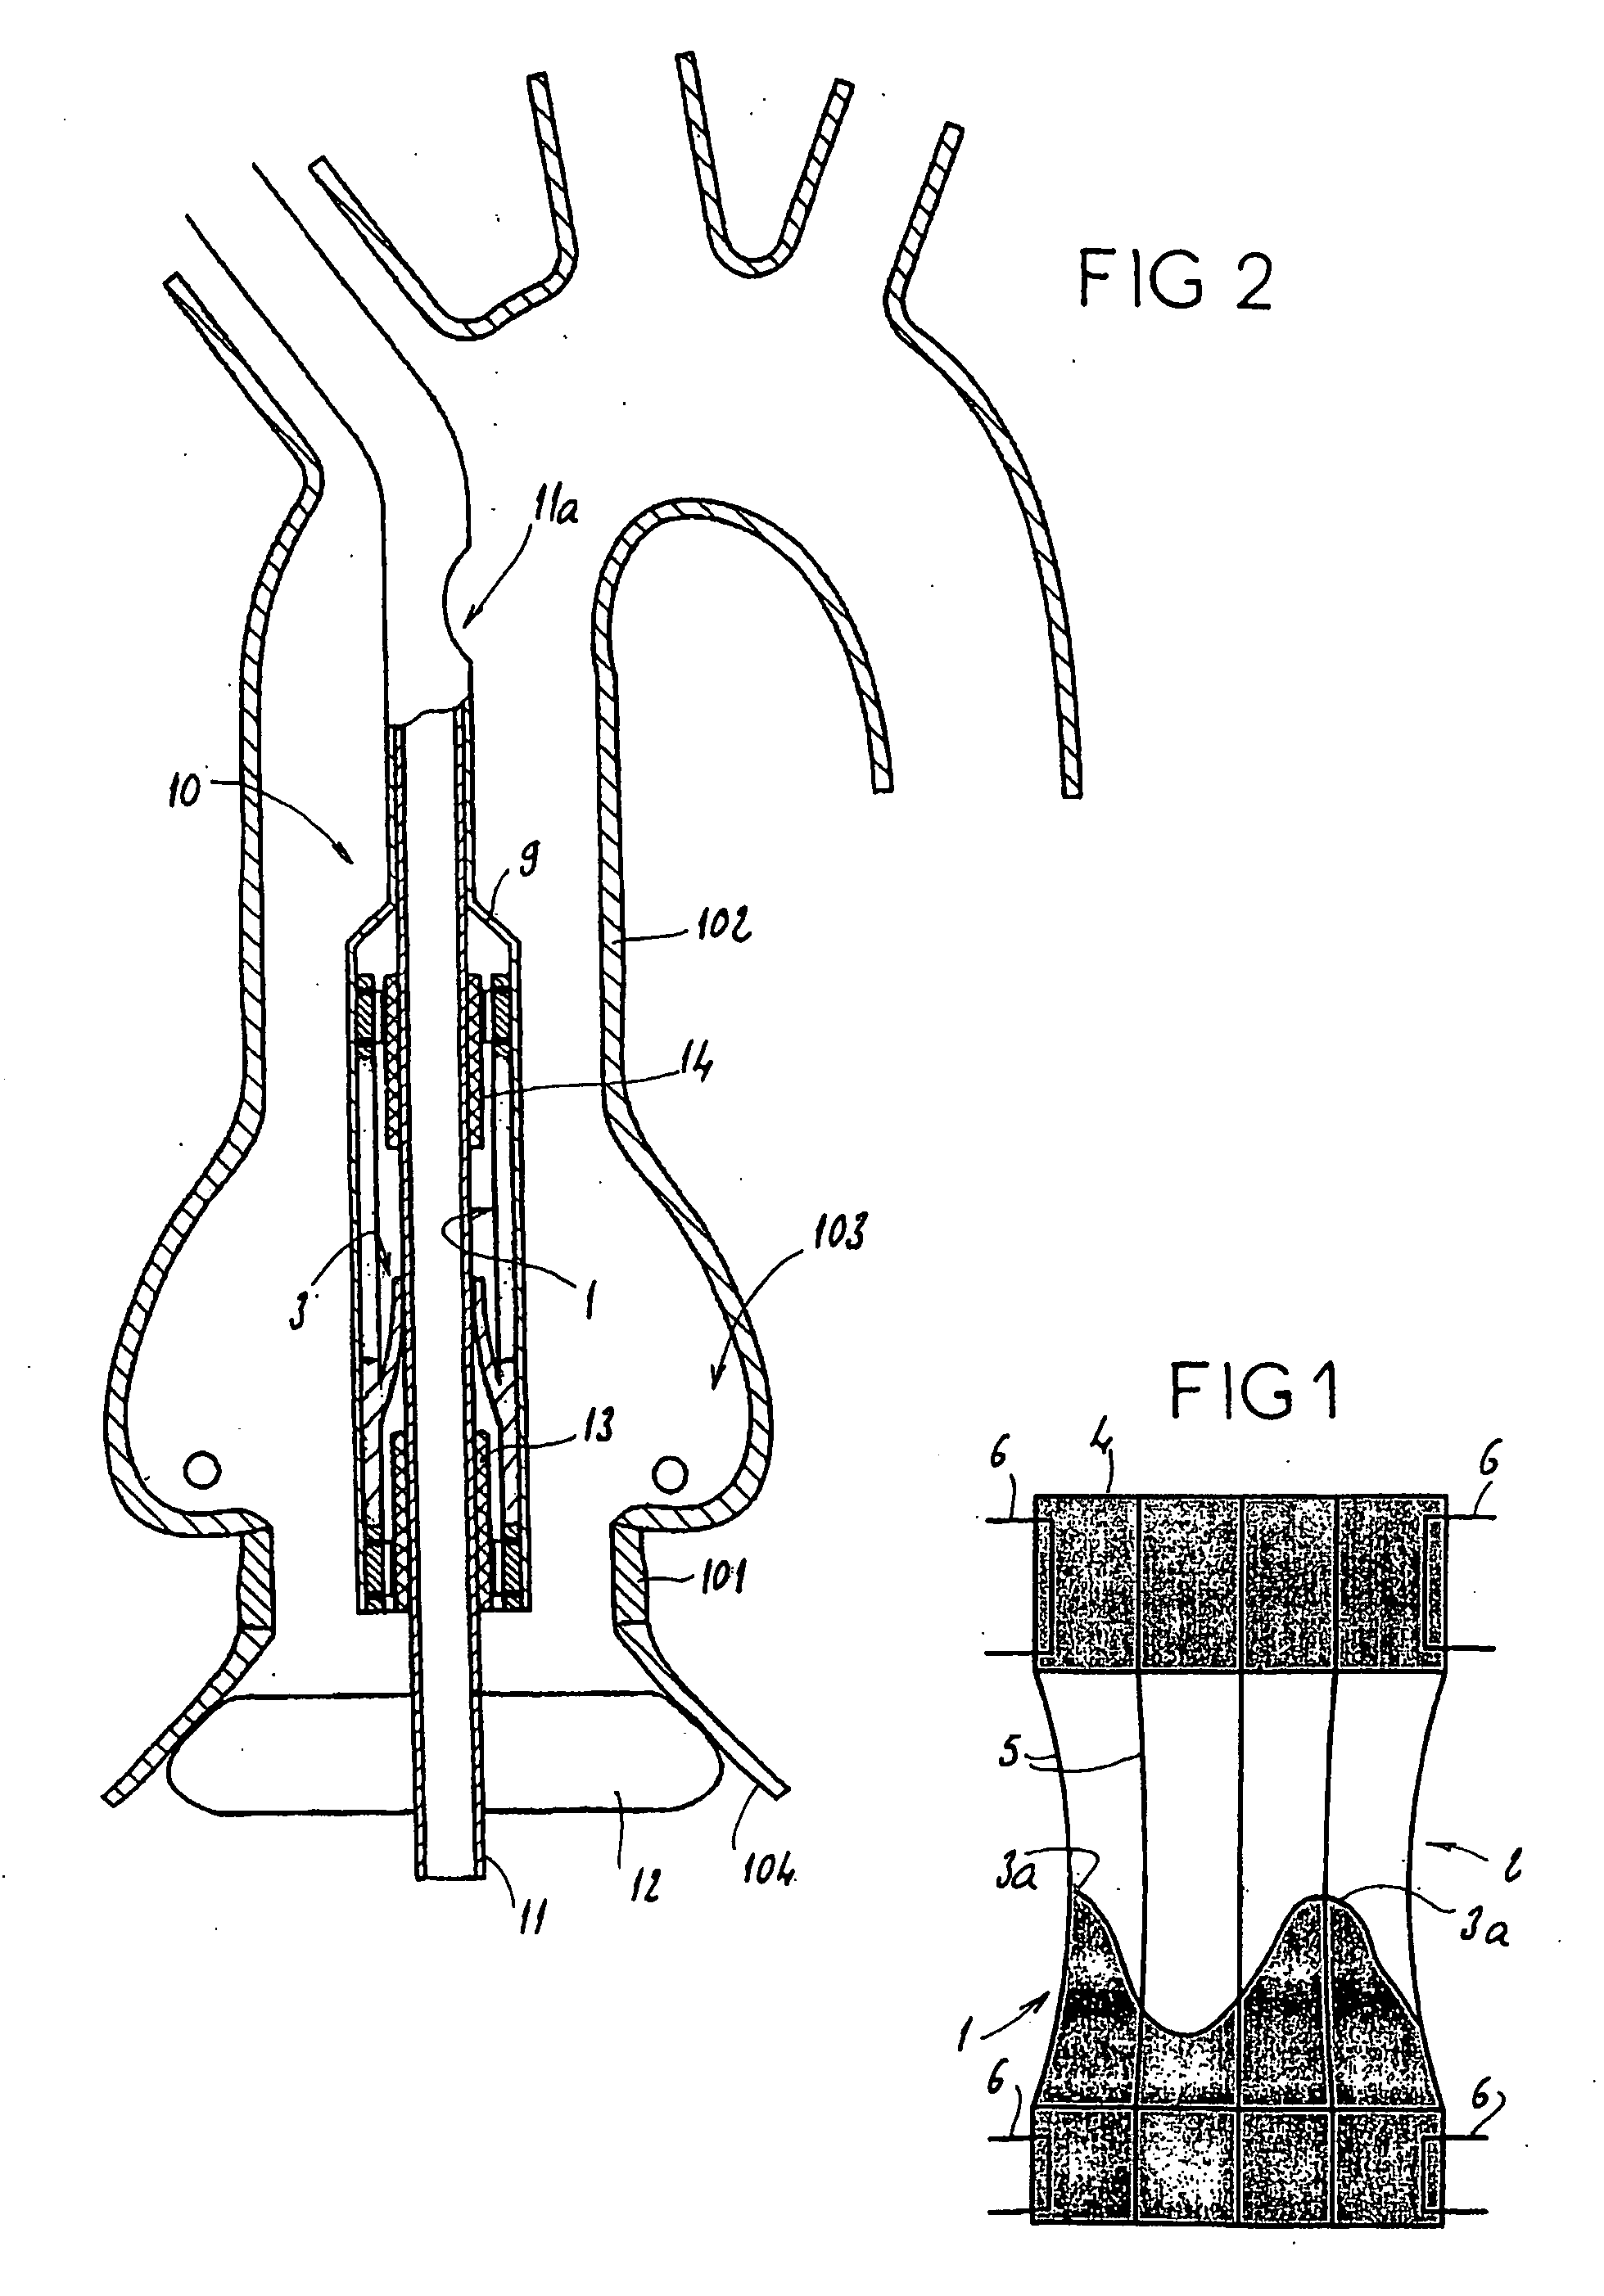 Assembly for setting a valve prosthesis in a corporeal duct